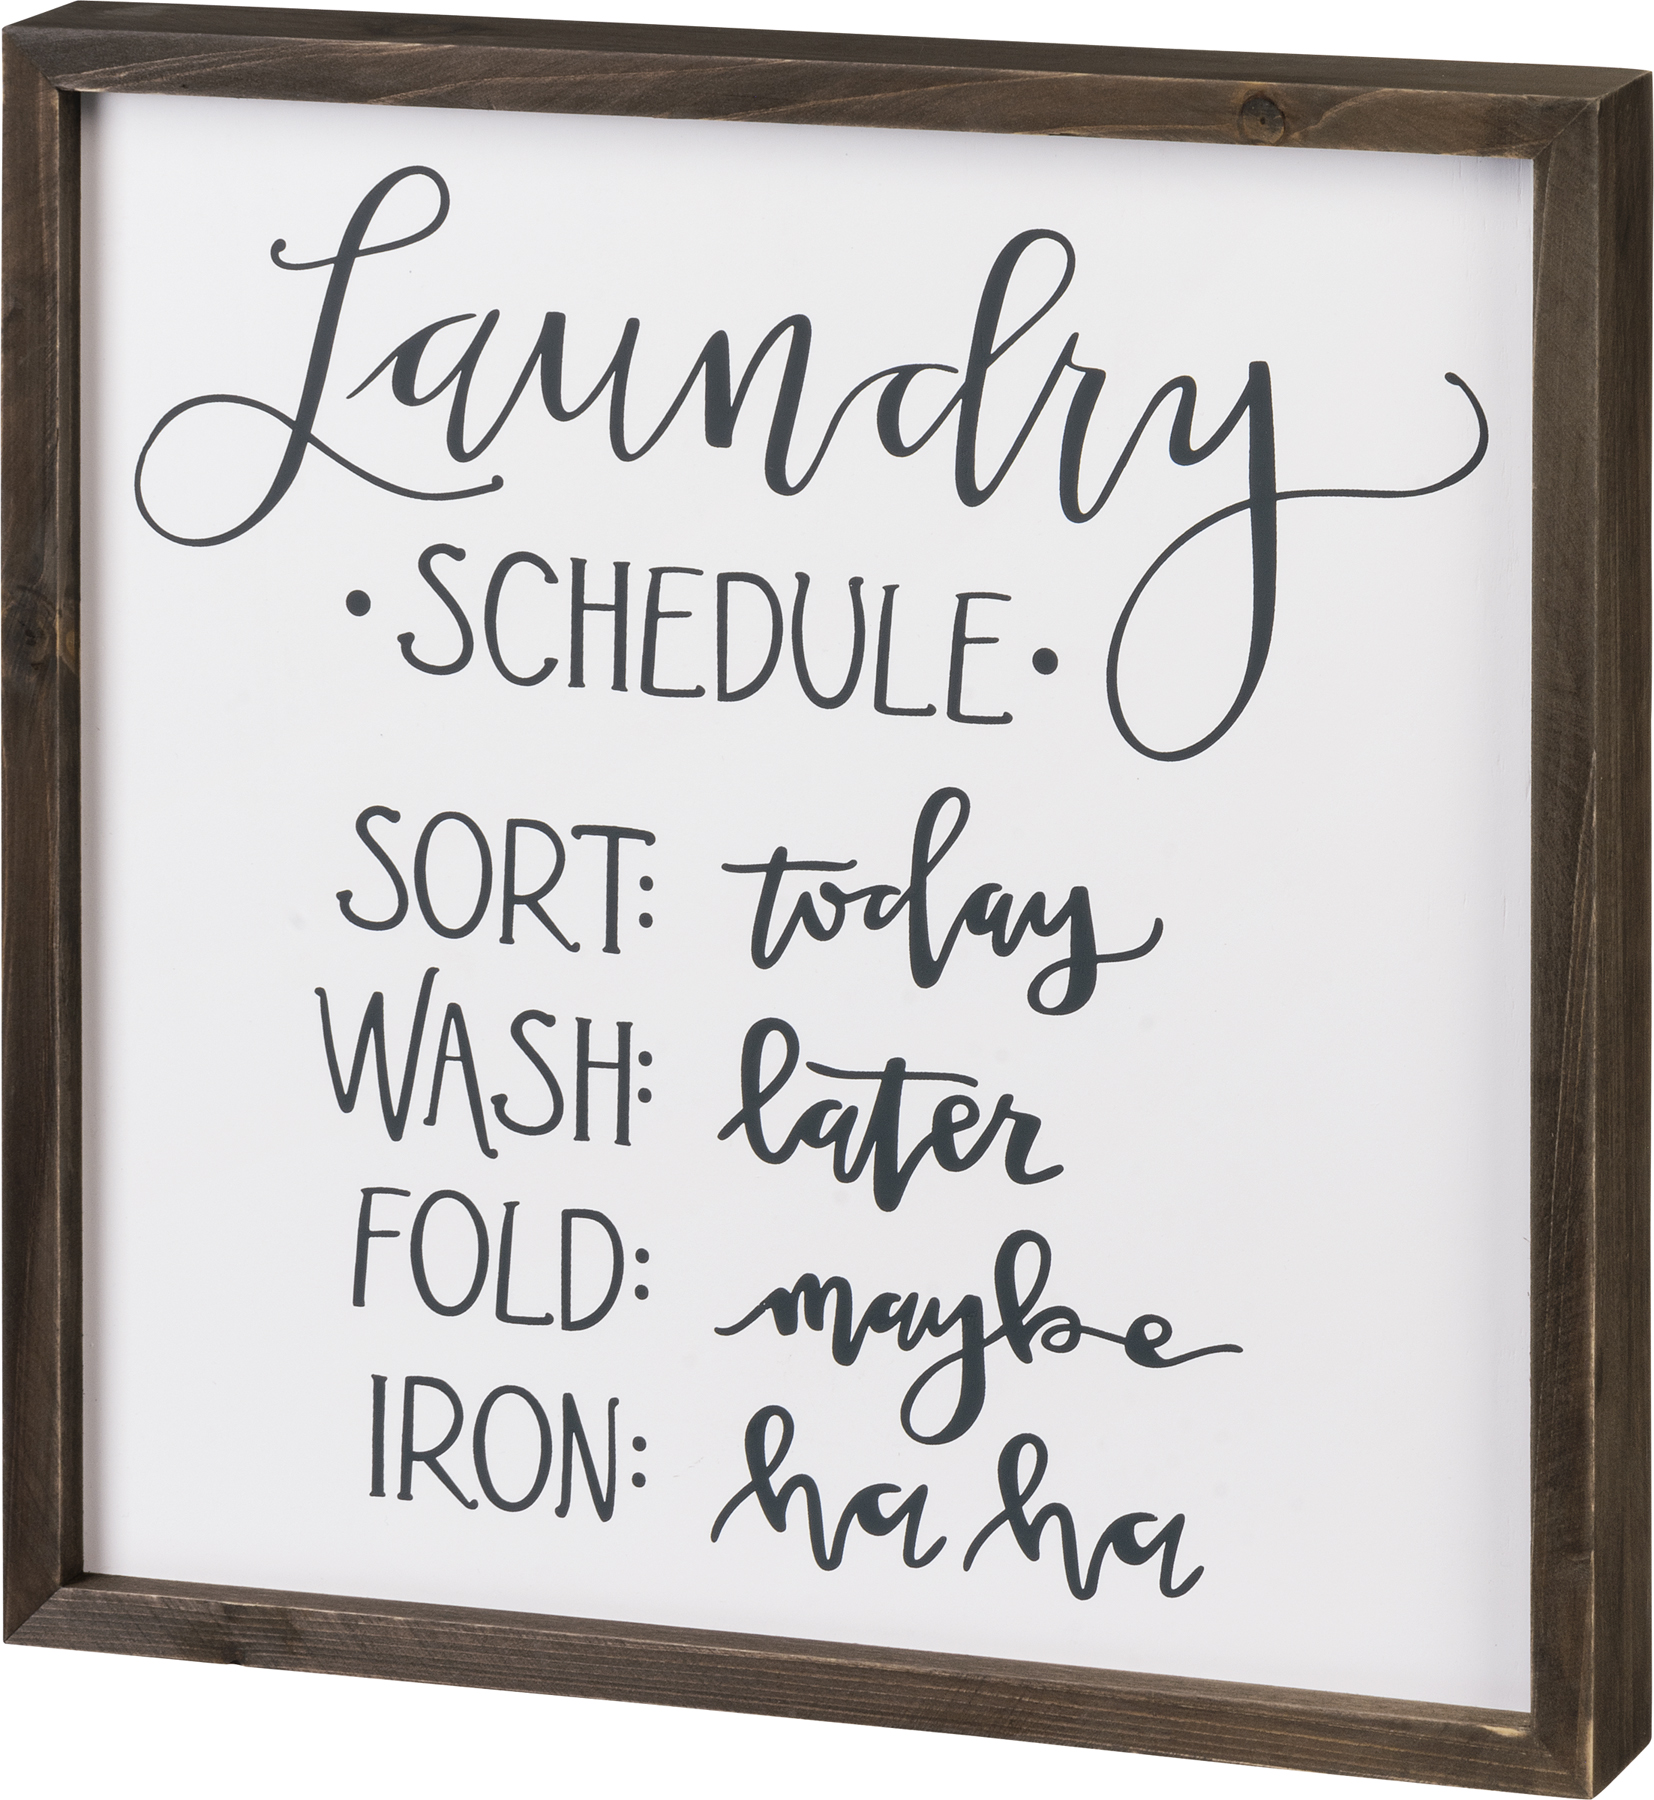 Maybe Iron ha Box Sign Later Fold Primitives by Kathy Laundry Schedule Sort Today Wash